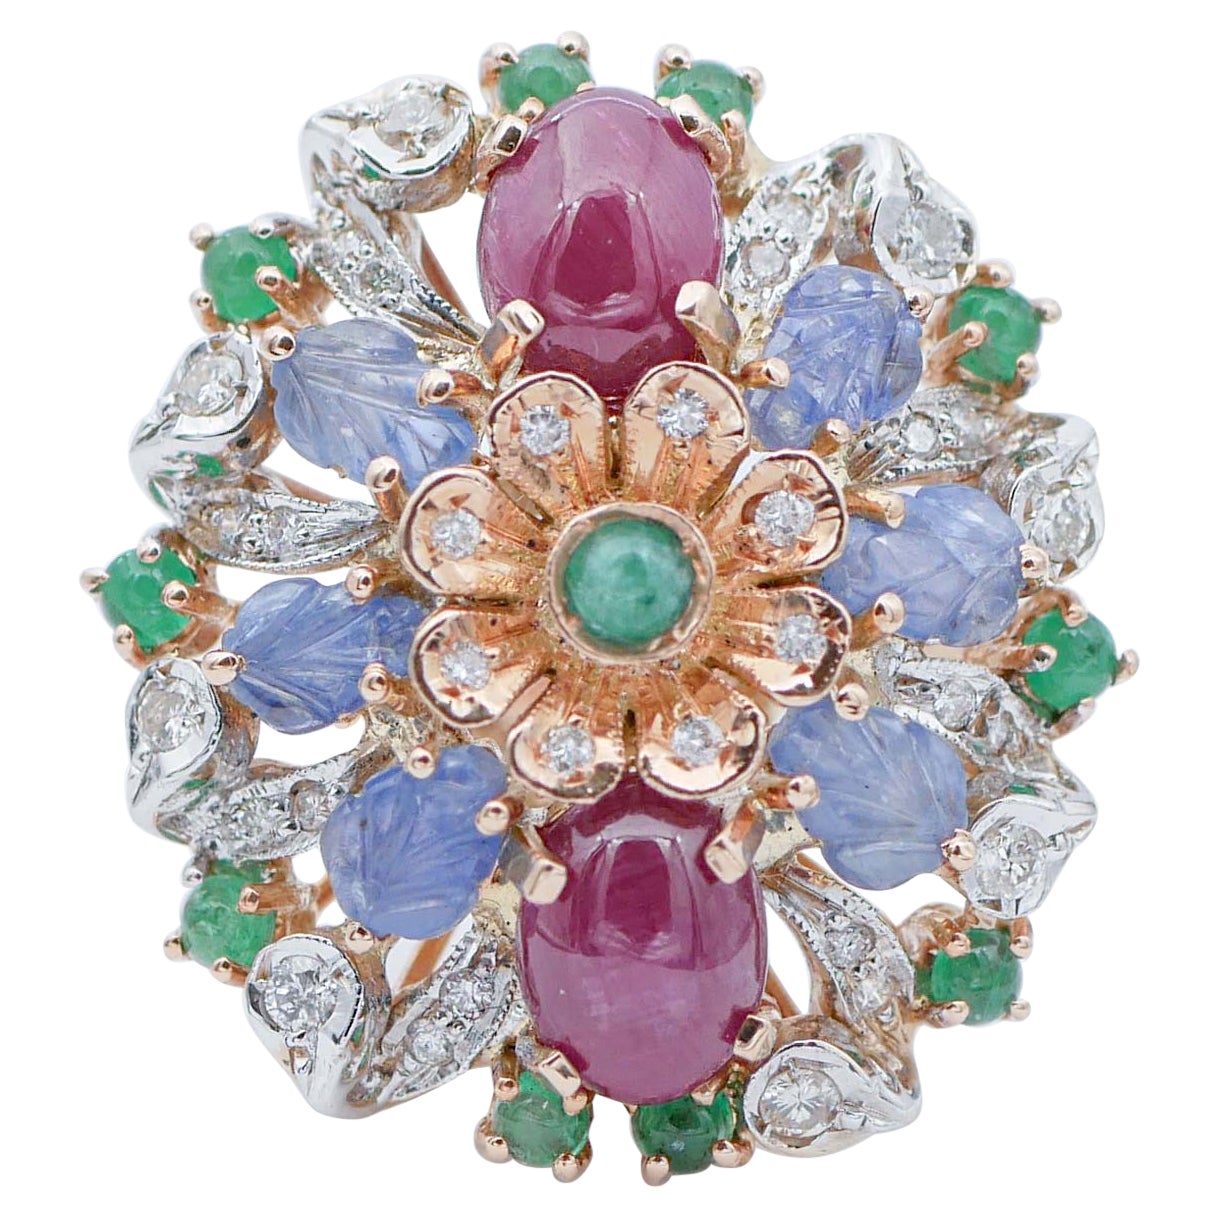 Rubies, Sapphires, Emeralds, Diamonds, 14 Karat Rose and White Gold Ring For Sale